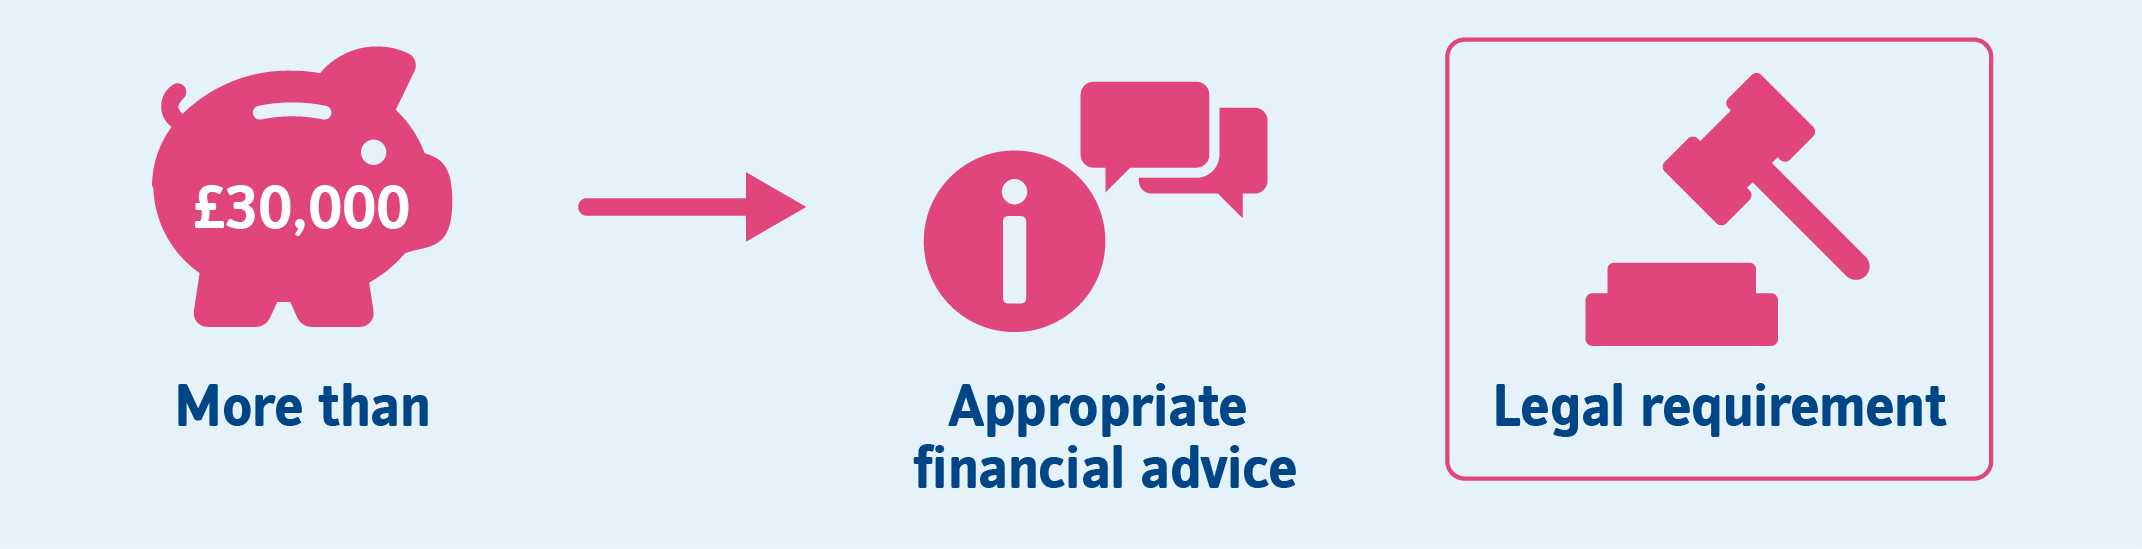 More than £30,000 -> Appropriate financial advice. Legal requirement